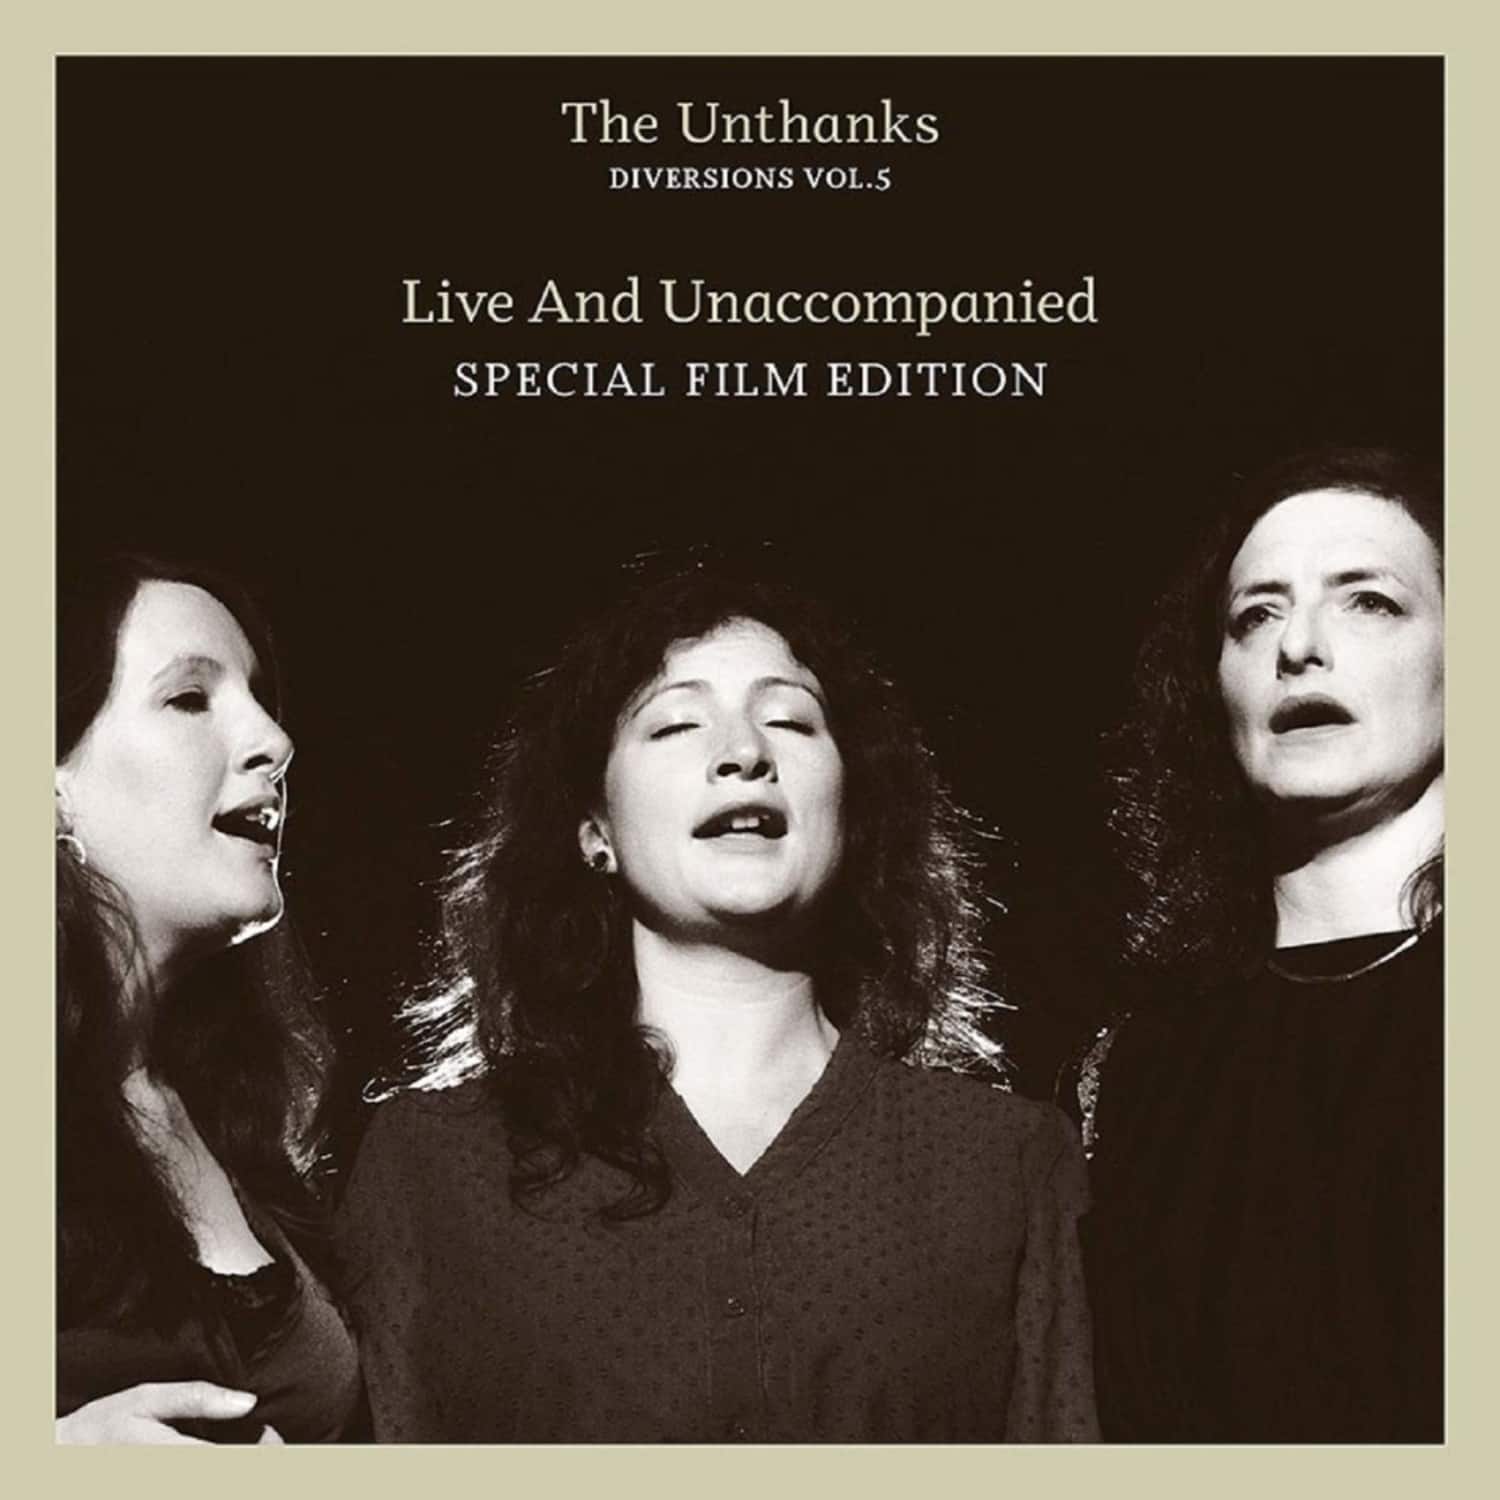 The Unthanks - DIVERSIONS VOL.5-LIVE AND UNACCOMPANIED 